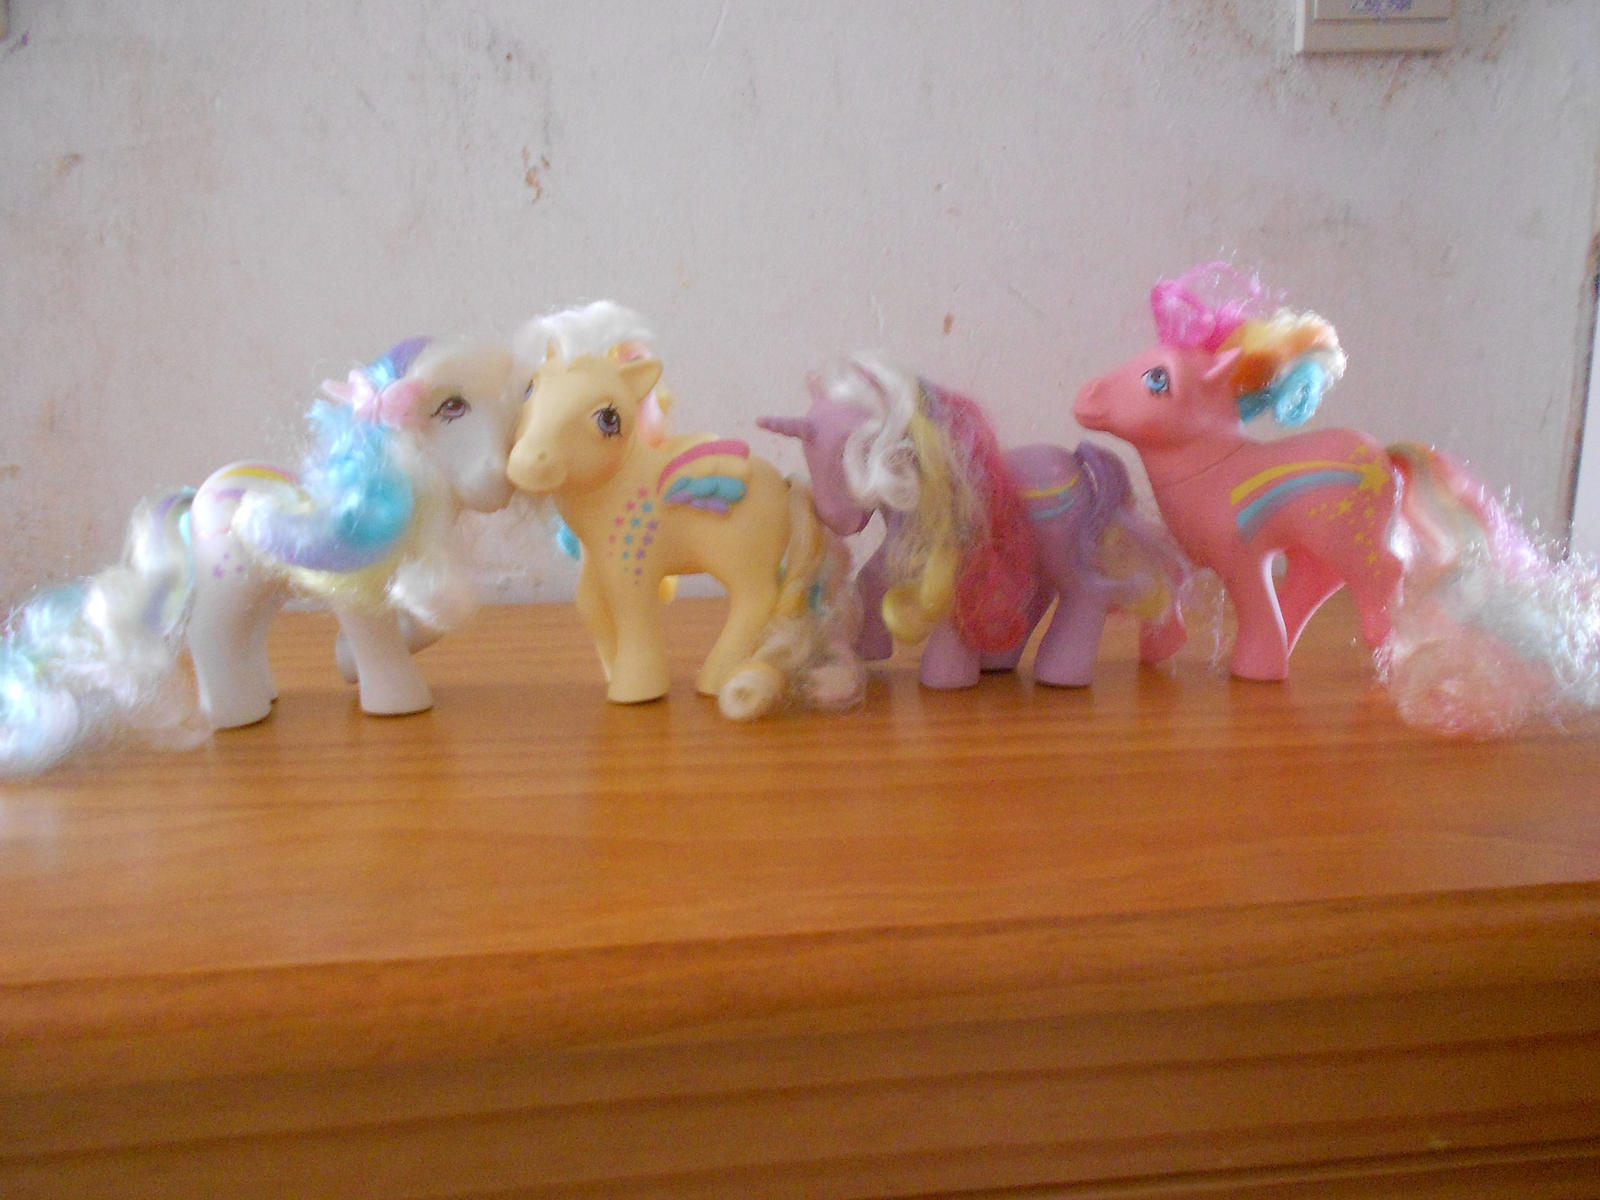 my little pony collection: rainbow curl ponies